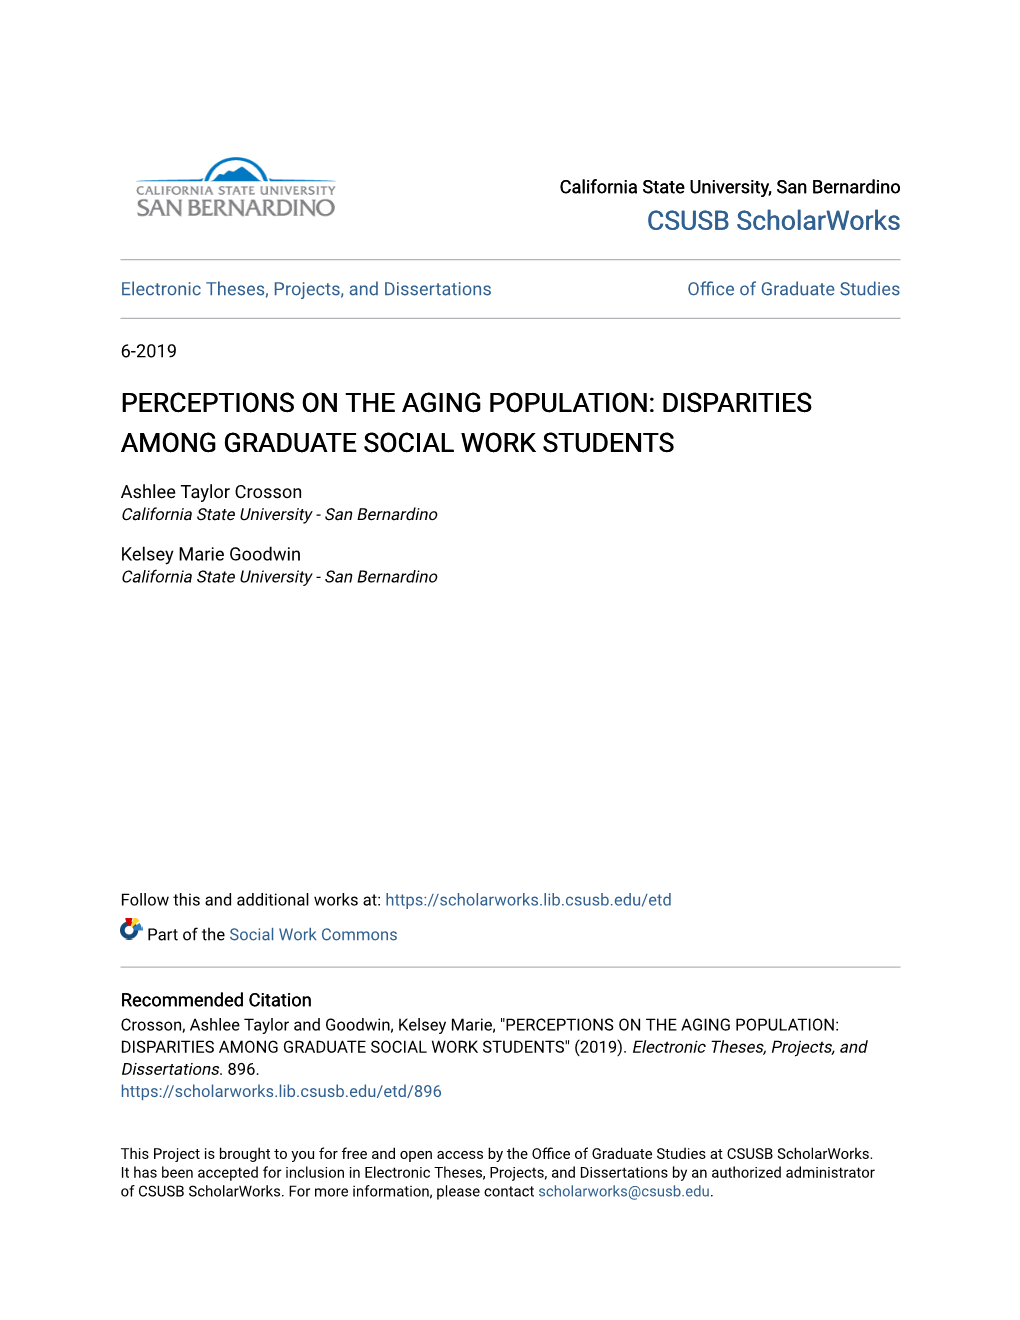 Perceptions on the Aging Population: Disparities Among Graduate Social Work Students